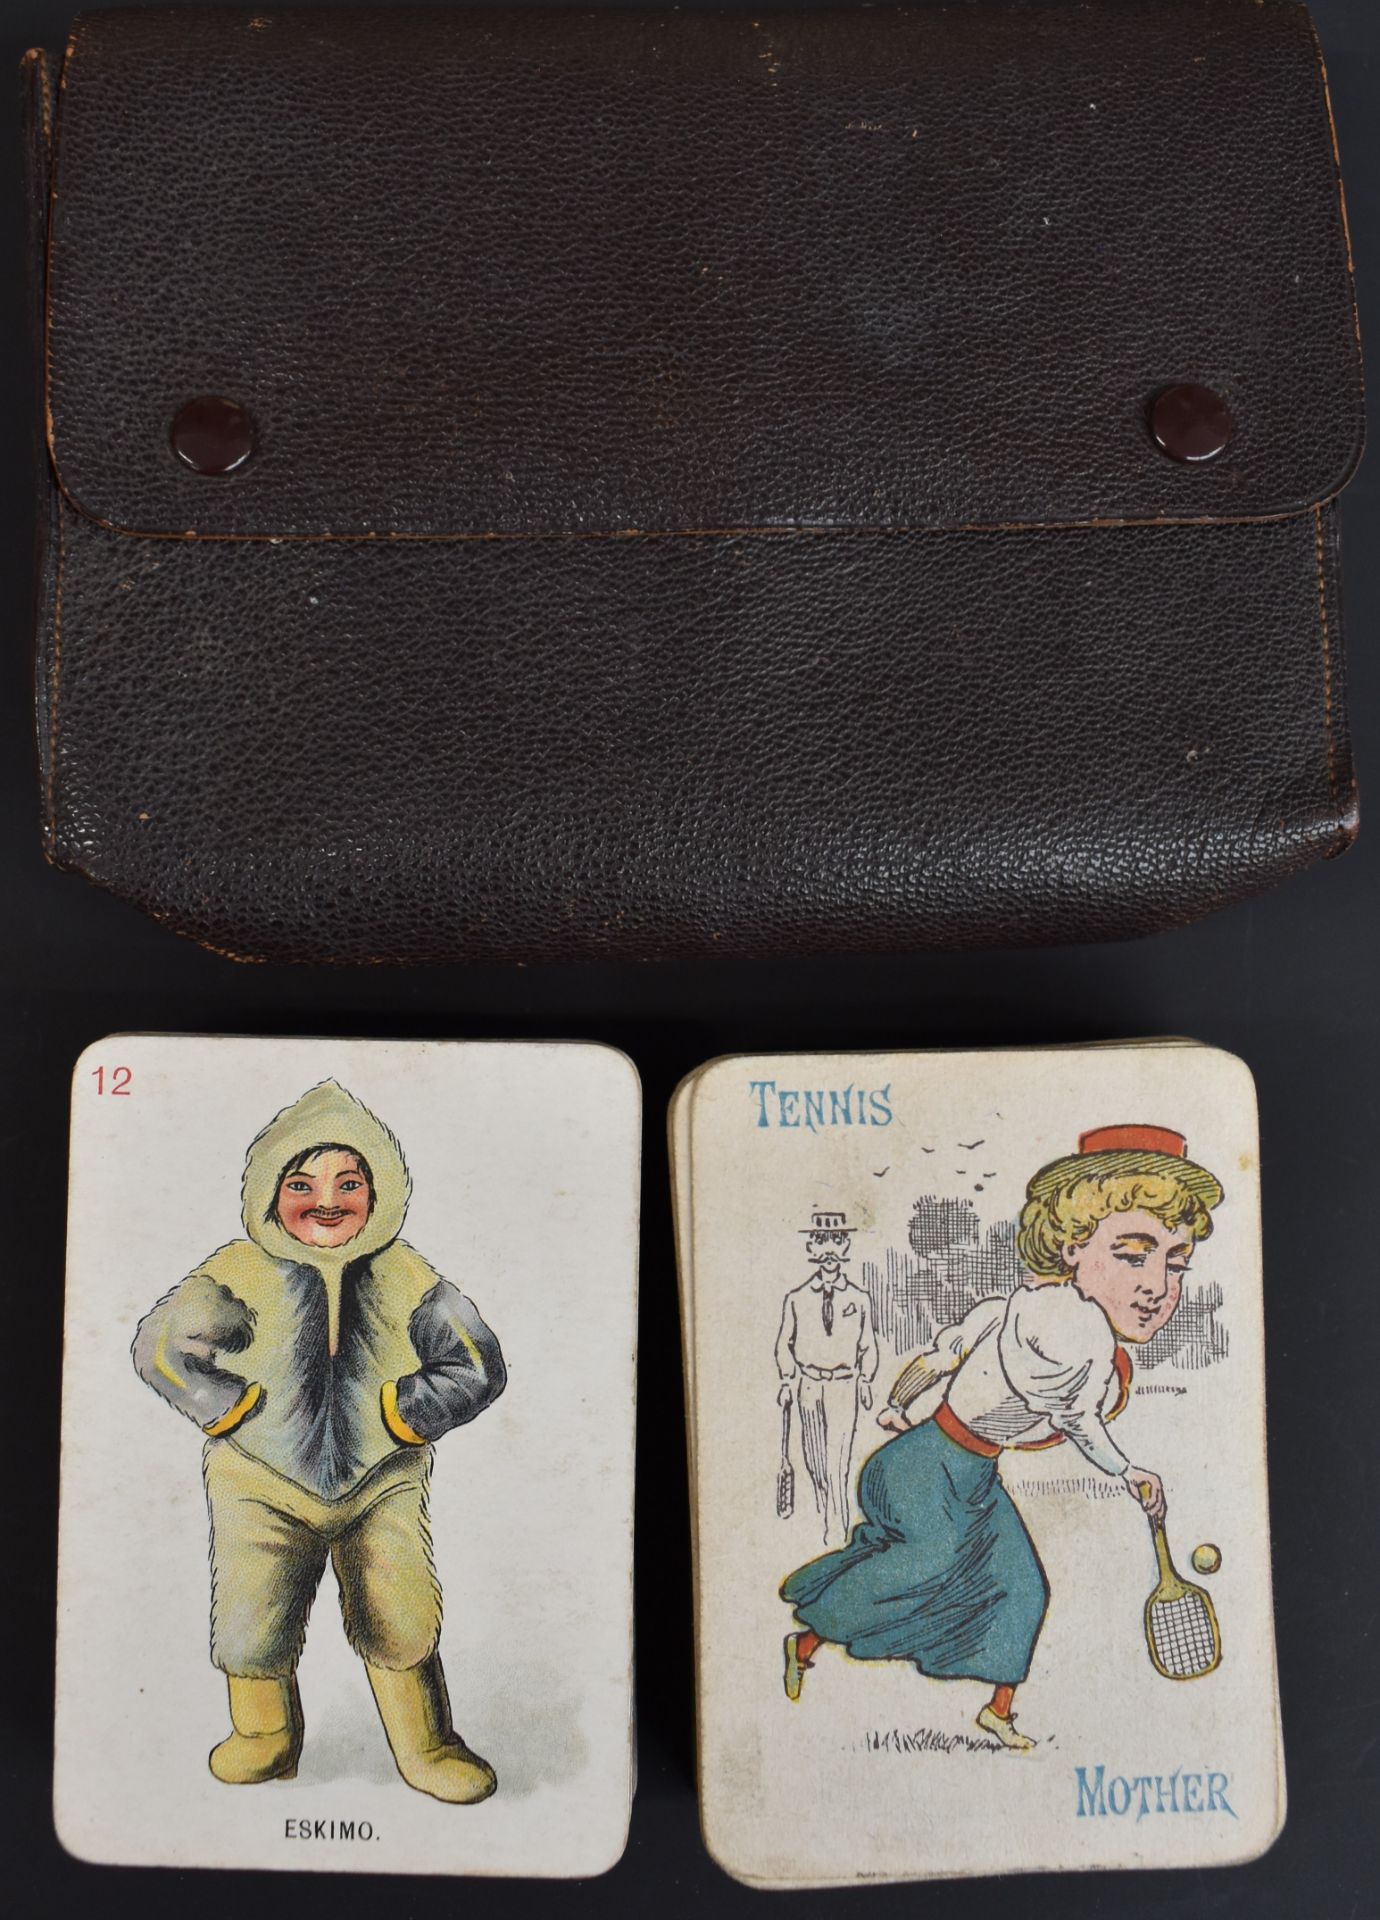 De La Rue Golly card game together with an Old Maid Happy Families sports playing card game